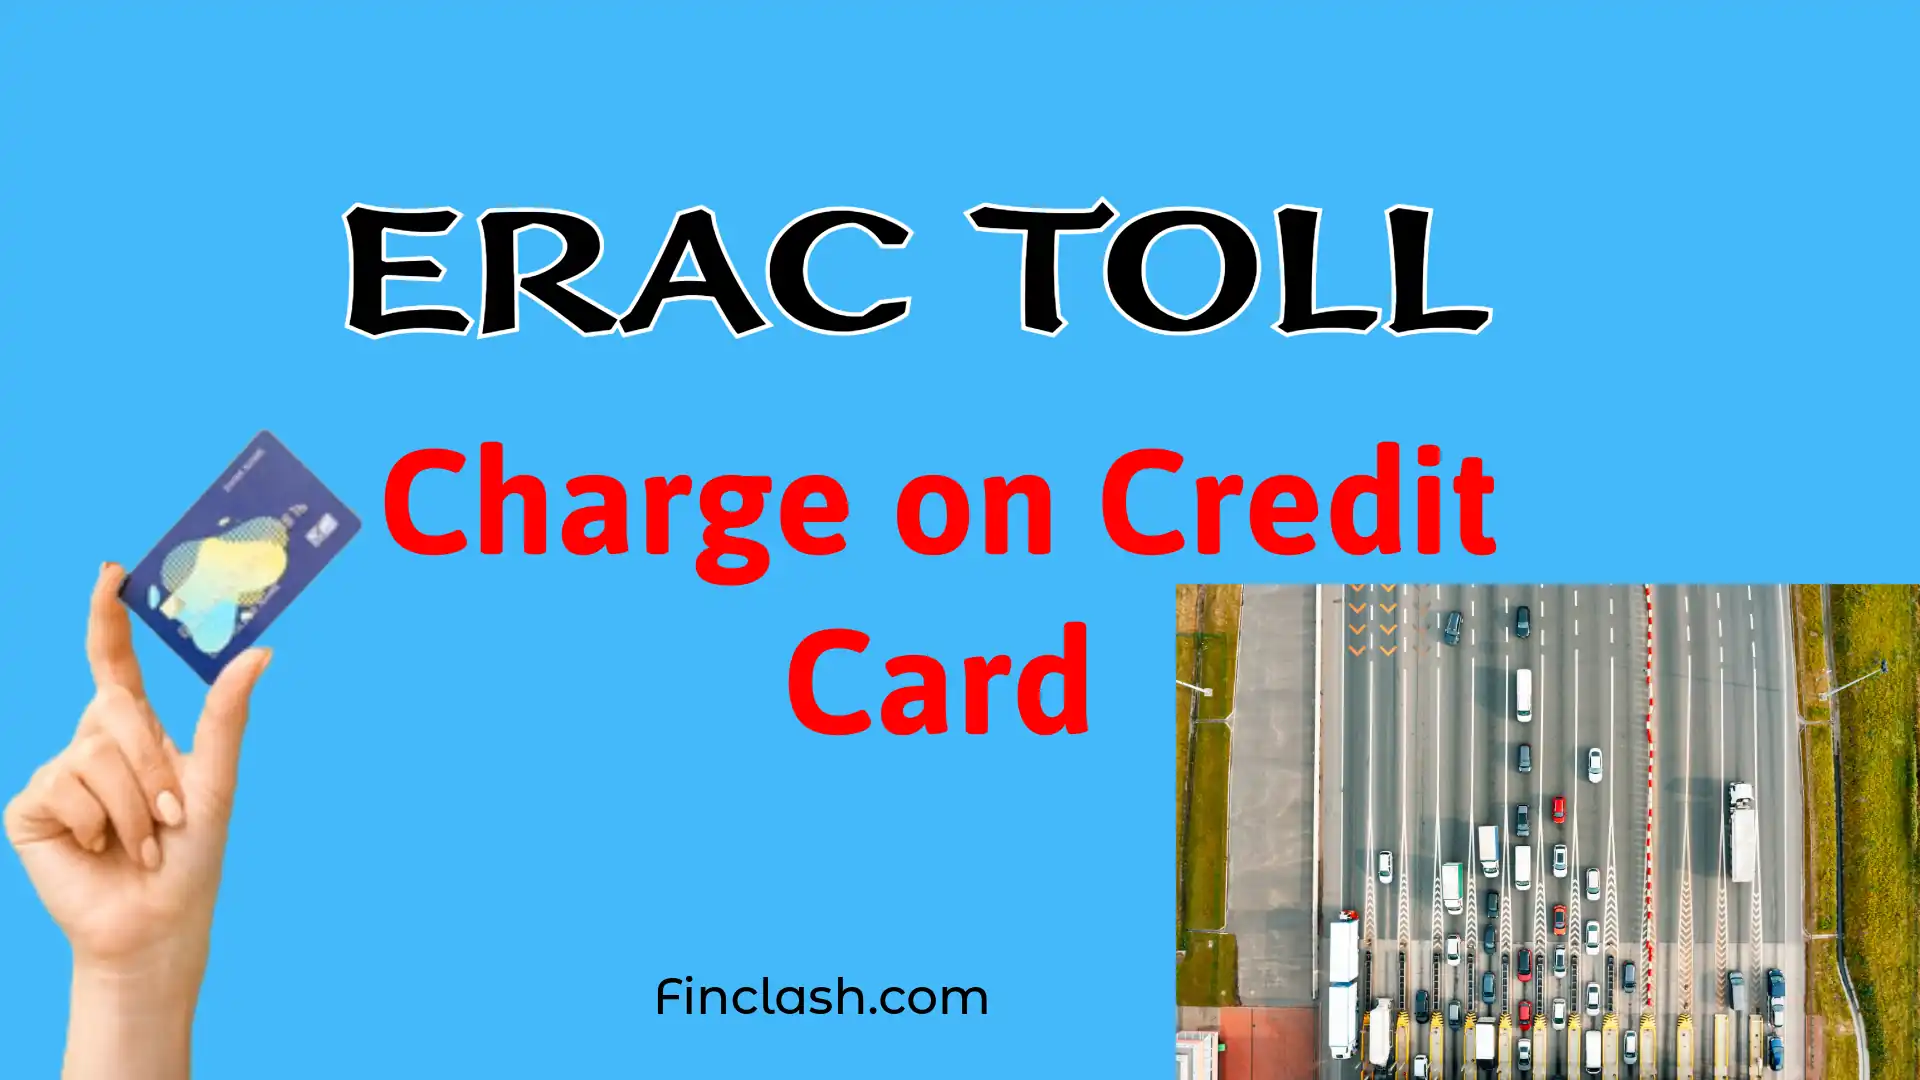 What is Erac Toll Charge on Credit Card?